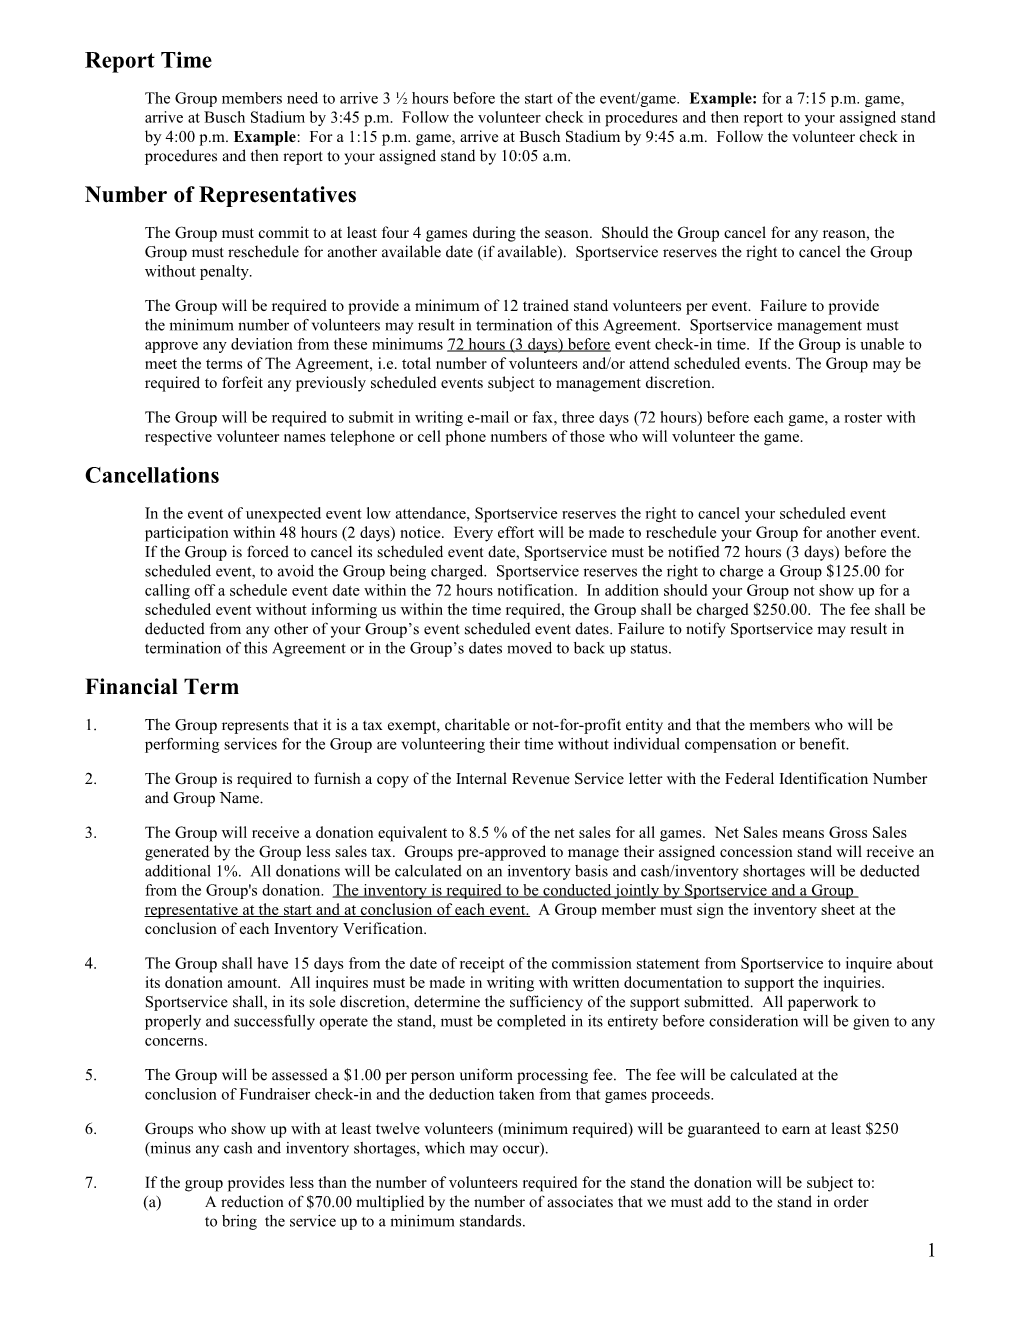 Fundraiser Agreement to Provide Concessions Operations 2003